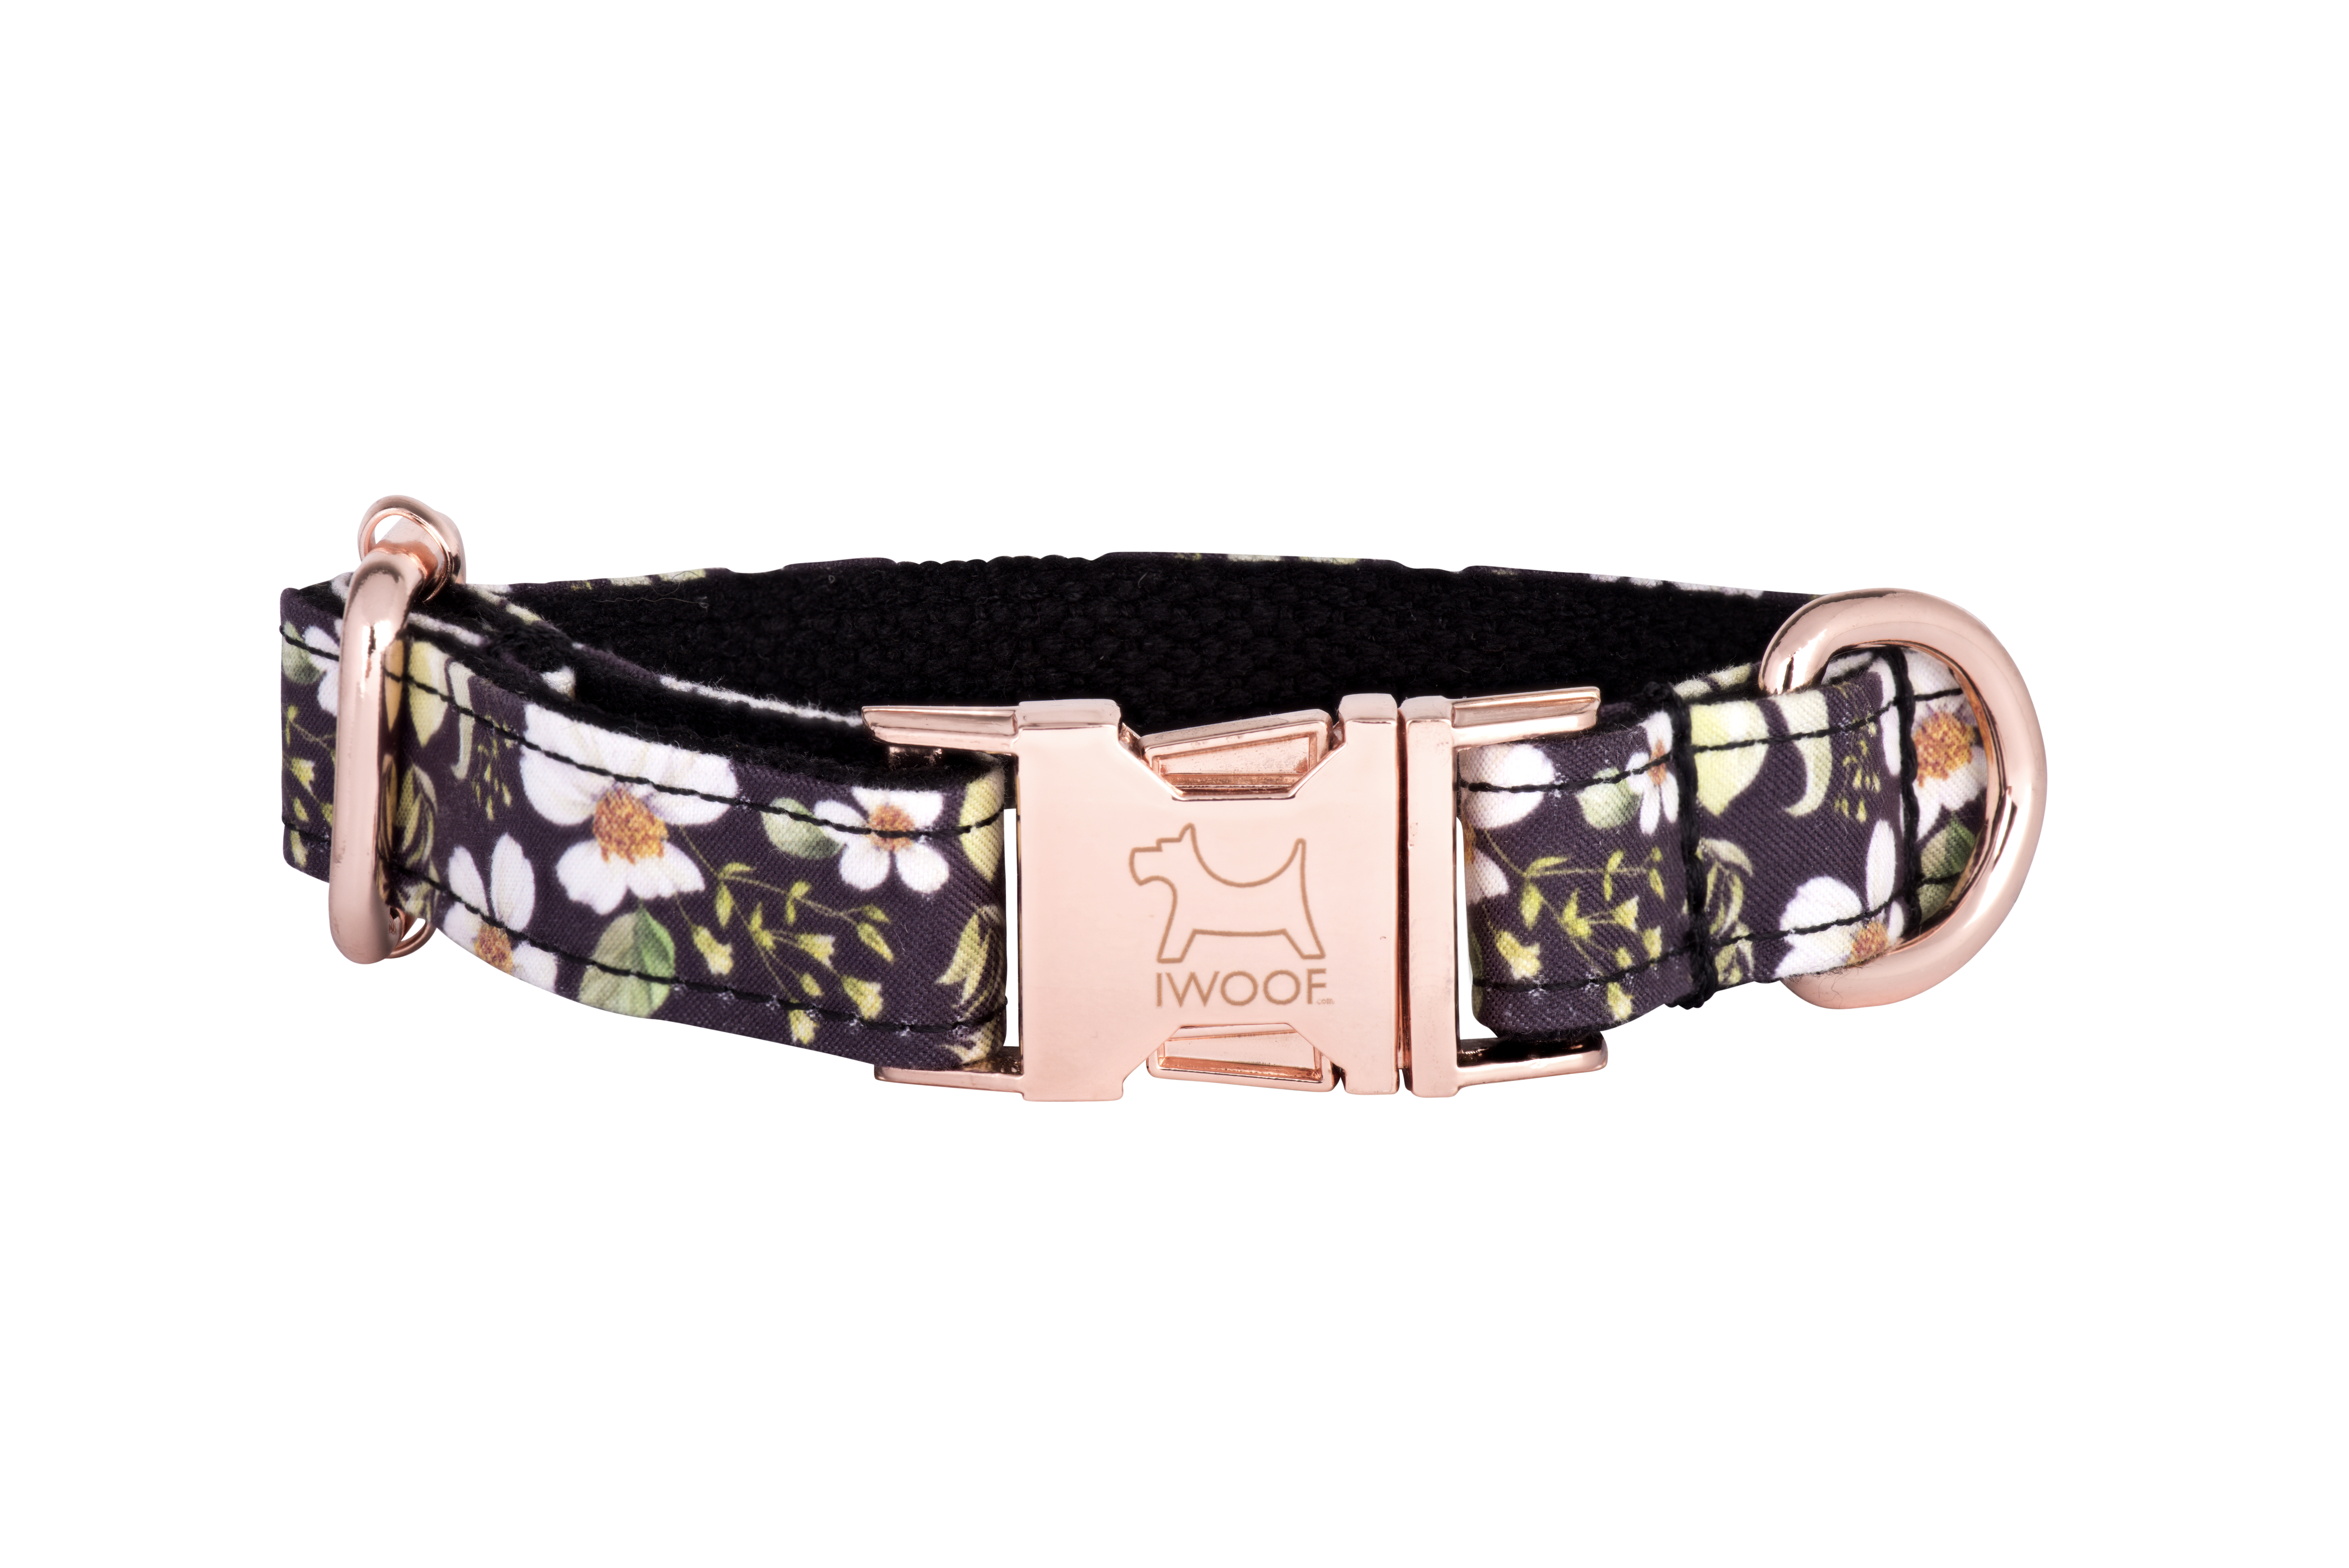 Cadgwith designer dog collar and matching dog lead with Rose Gold buckle